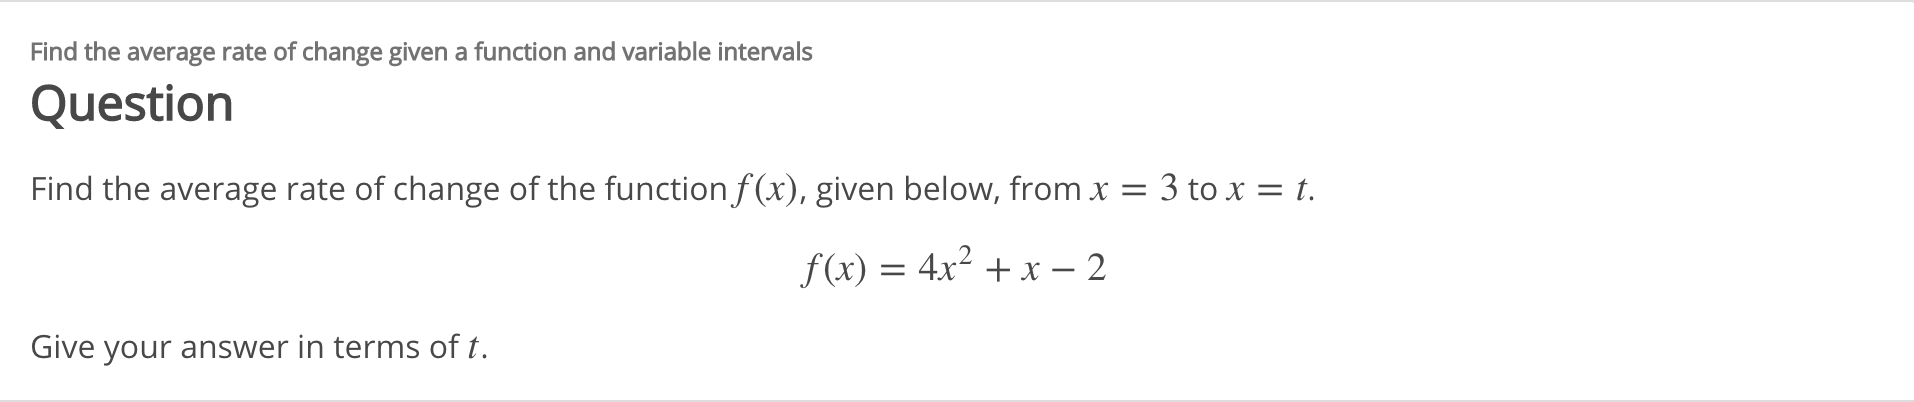 Find the average rate of change given a function and variable intervals
Question
Find the average rate of change of the function f(x), given below, from x =
3 to x = t.
f(x) = 4x² + x – 2
Give your answer in terms of t.
